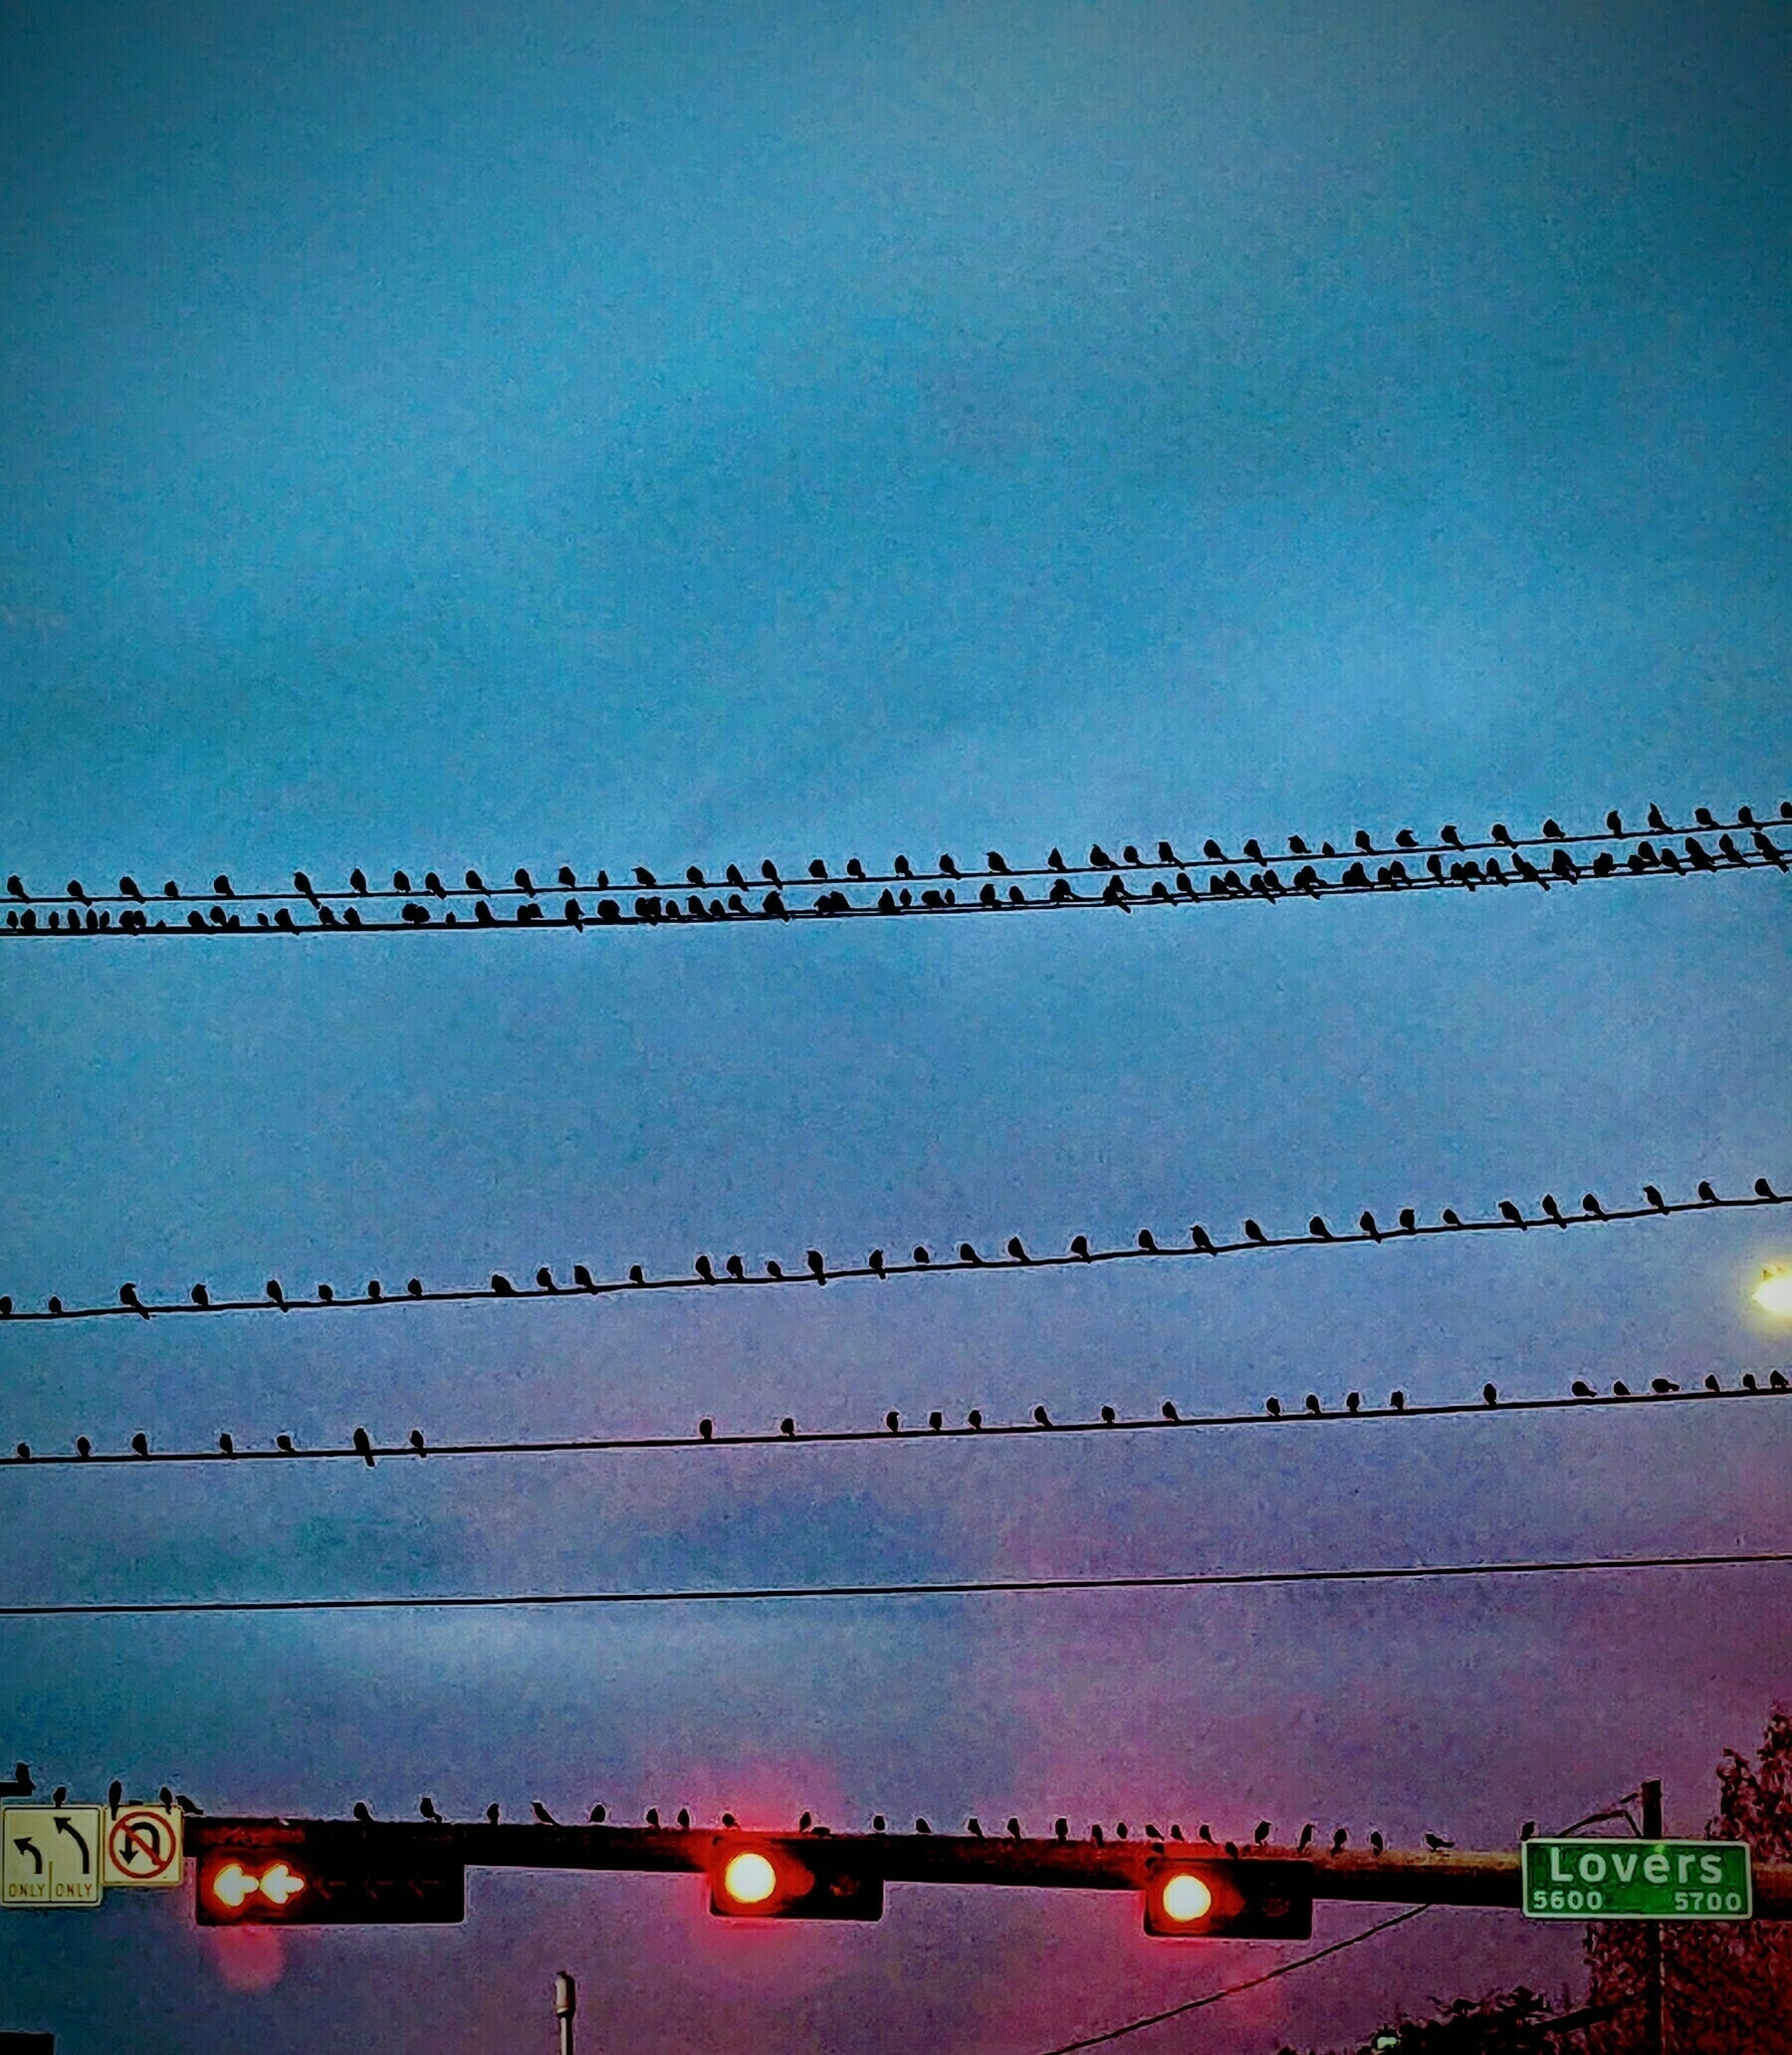 Birds on power lines against a stormy sky.